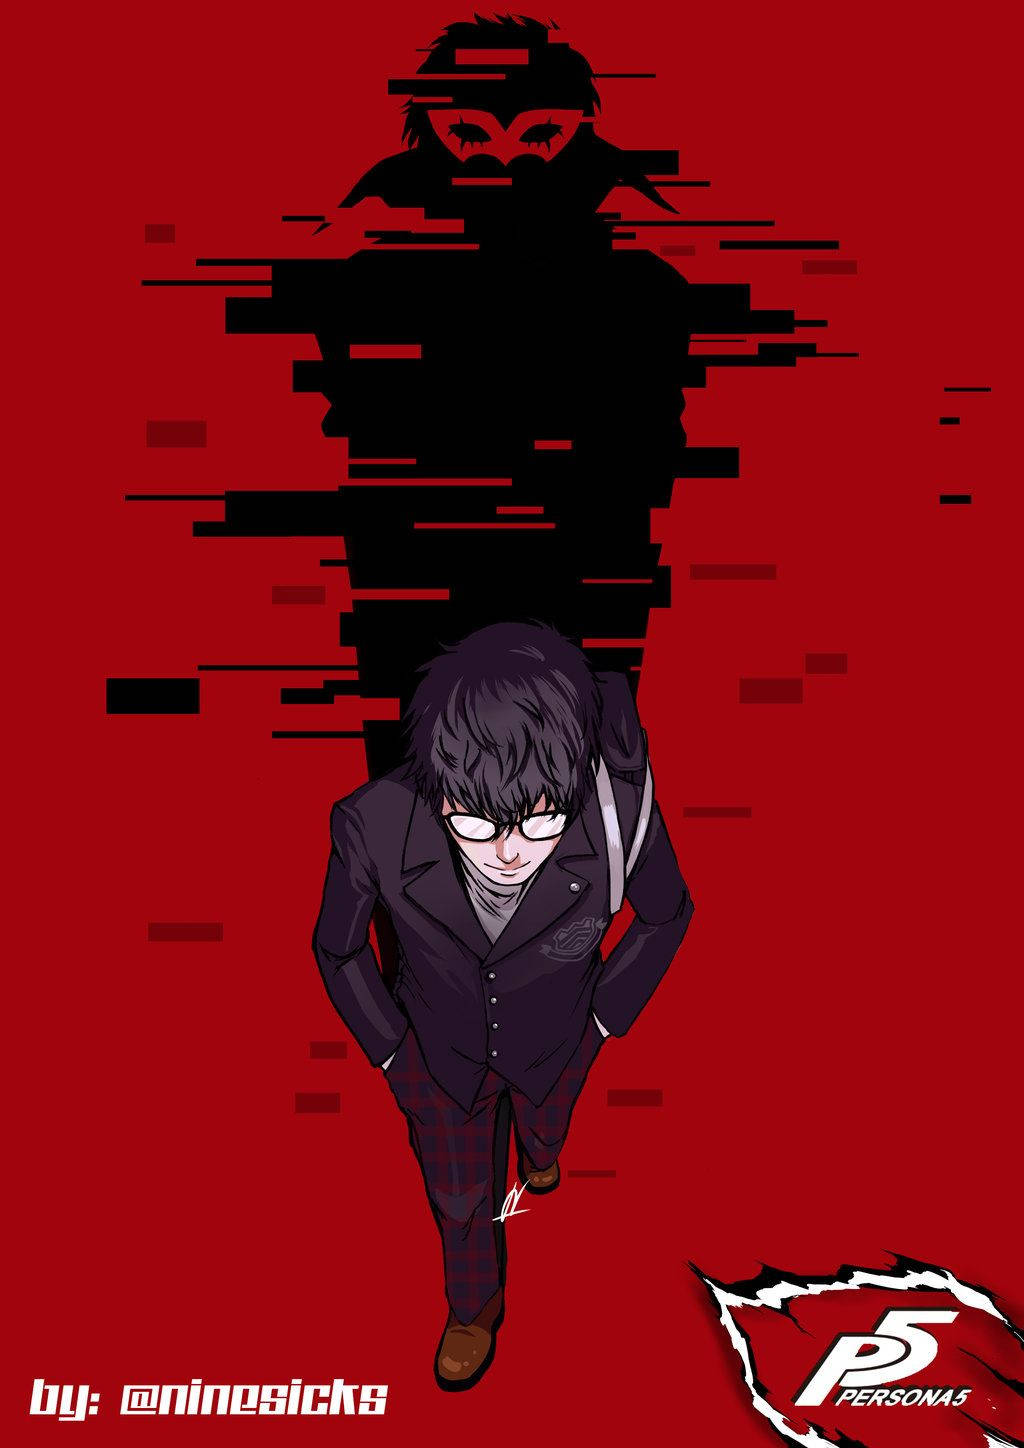 Follow the Phantom Thieves with Akira in 